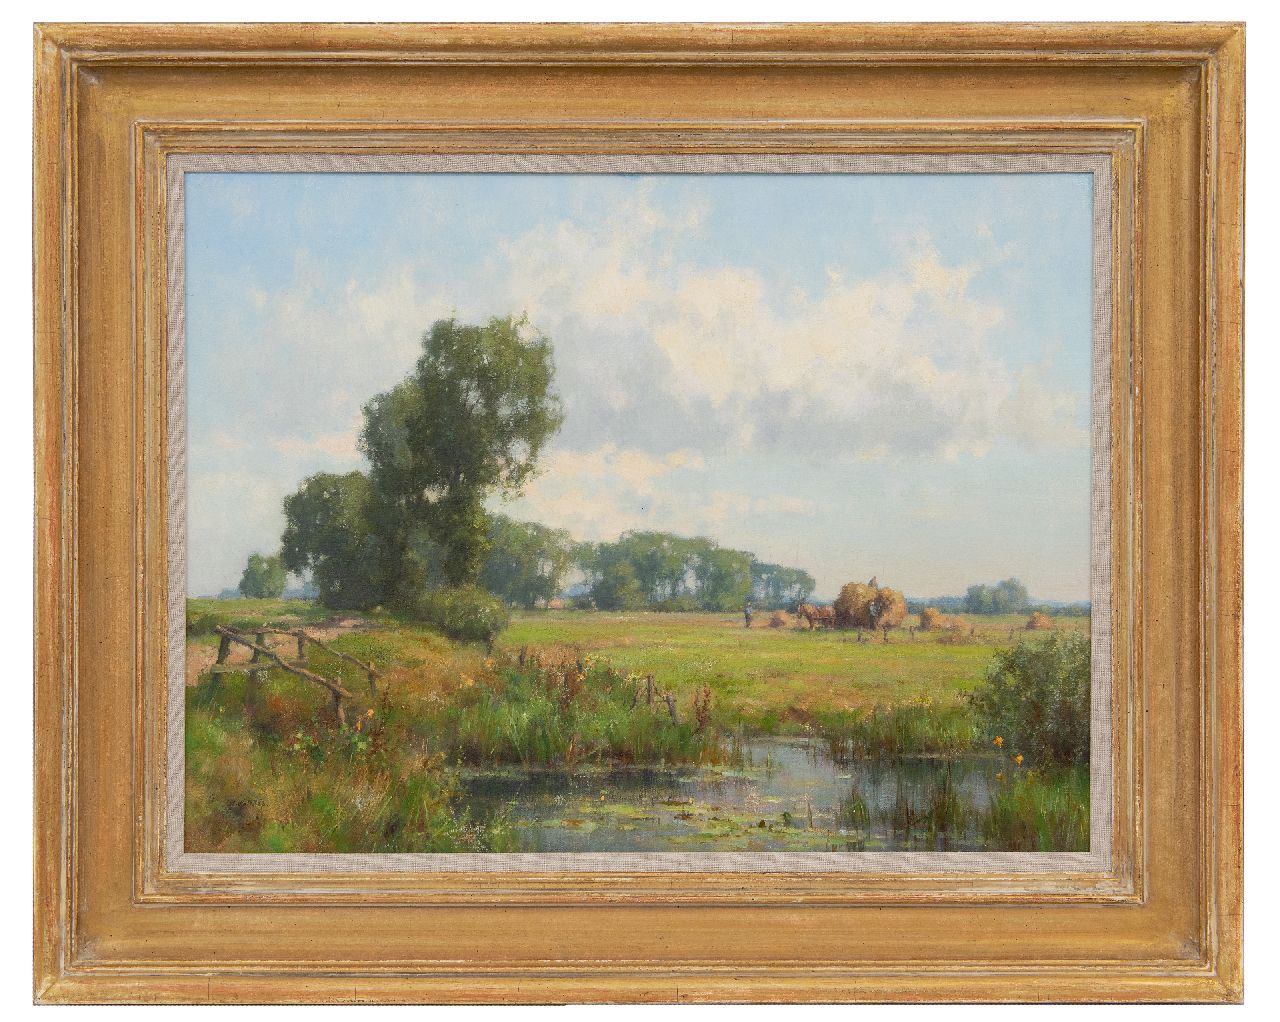 Holtrup J.  | Jan Holtrup | Paintings offered for sale | Hay harvest in the Gelderse Waard, oil on canvas 45.0 x 60.1 cm, signed l.l.